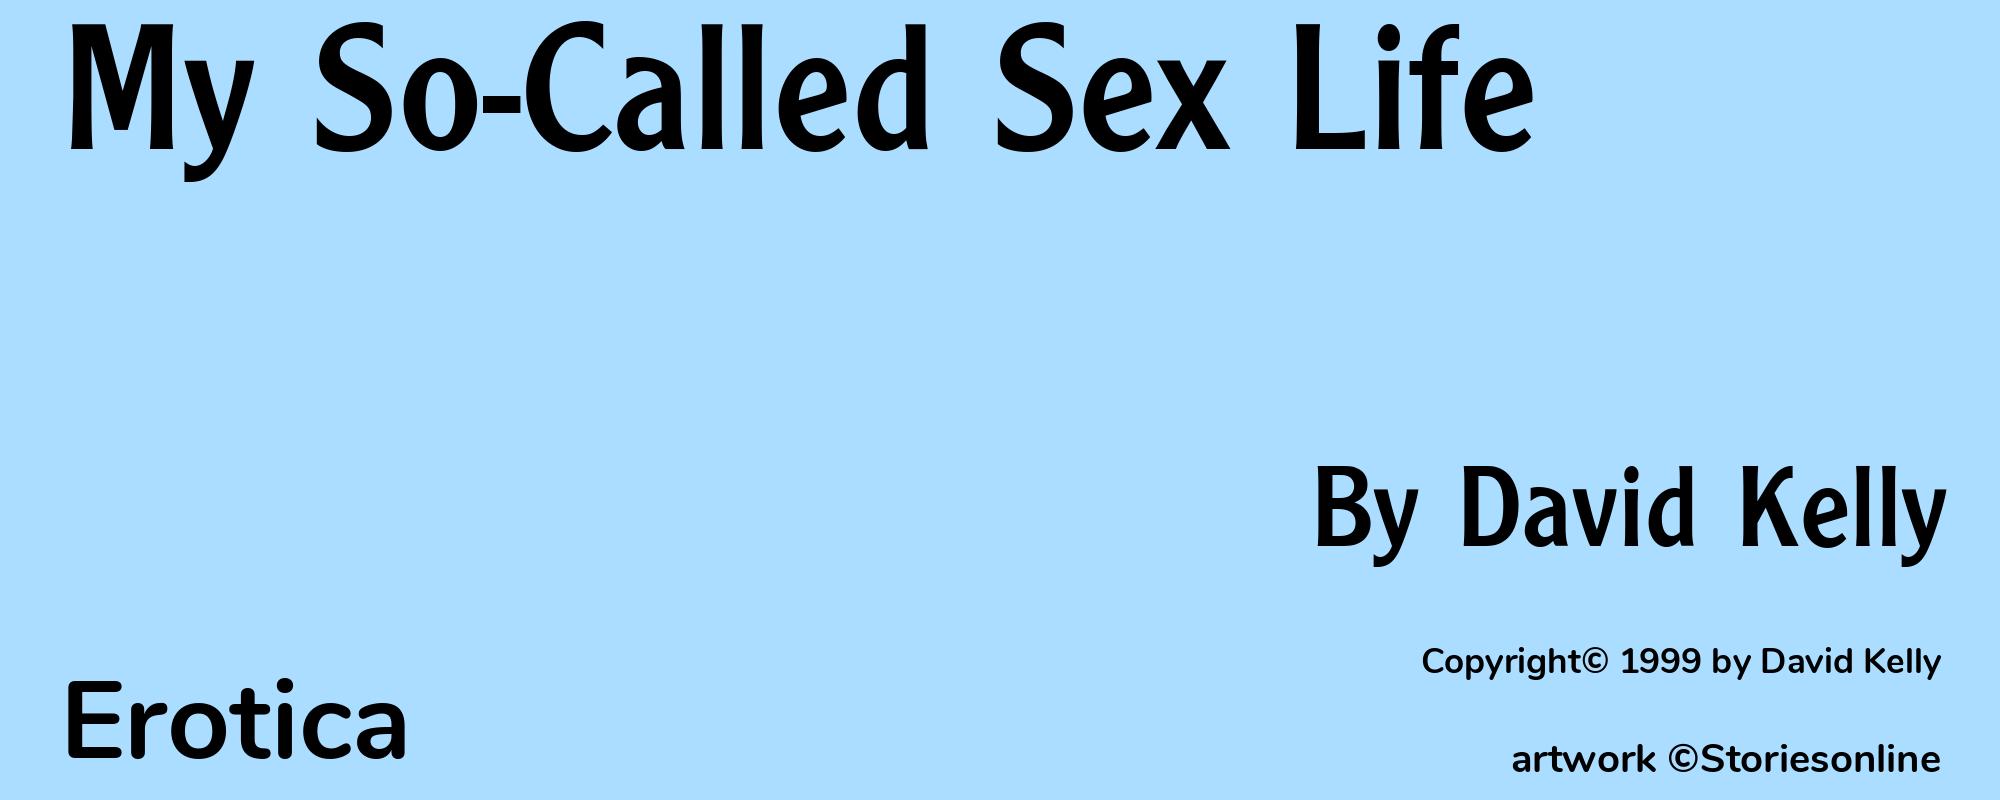 My So-Called Sex Life - Cover